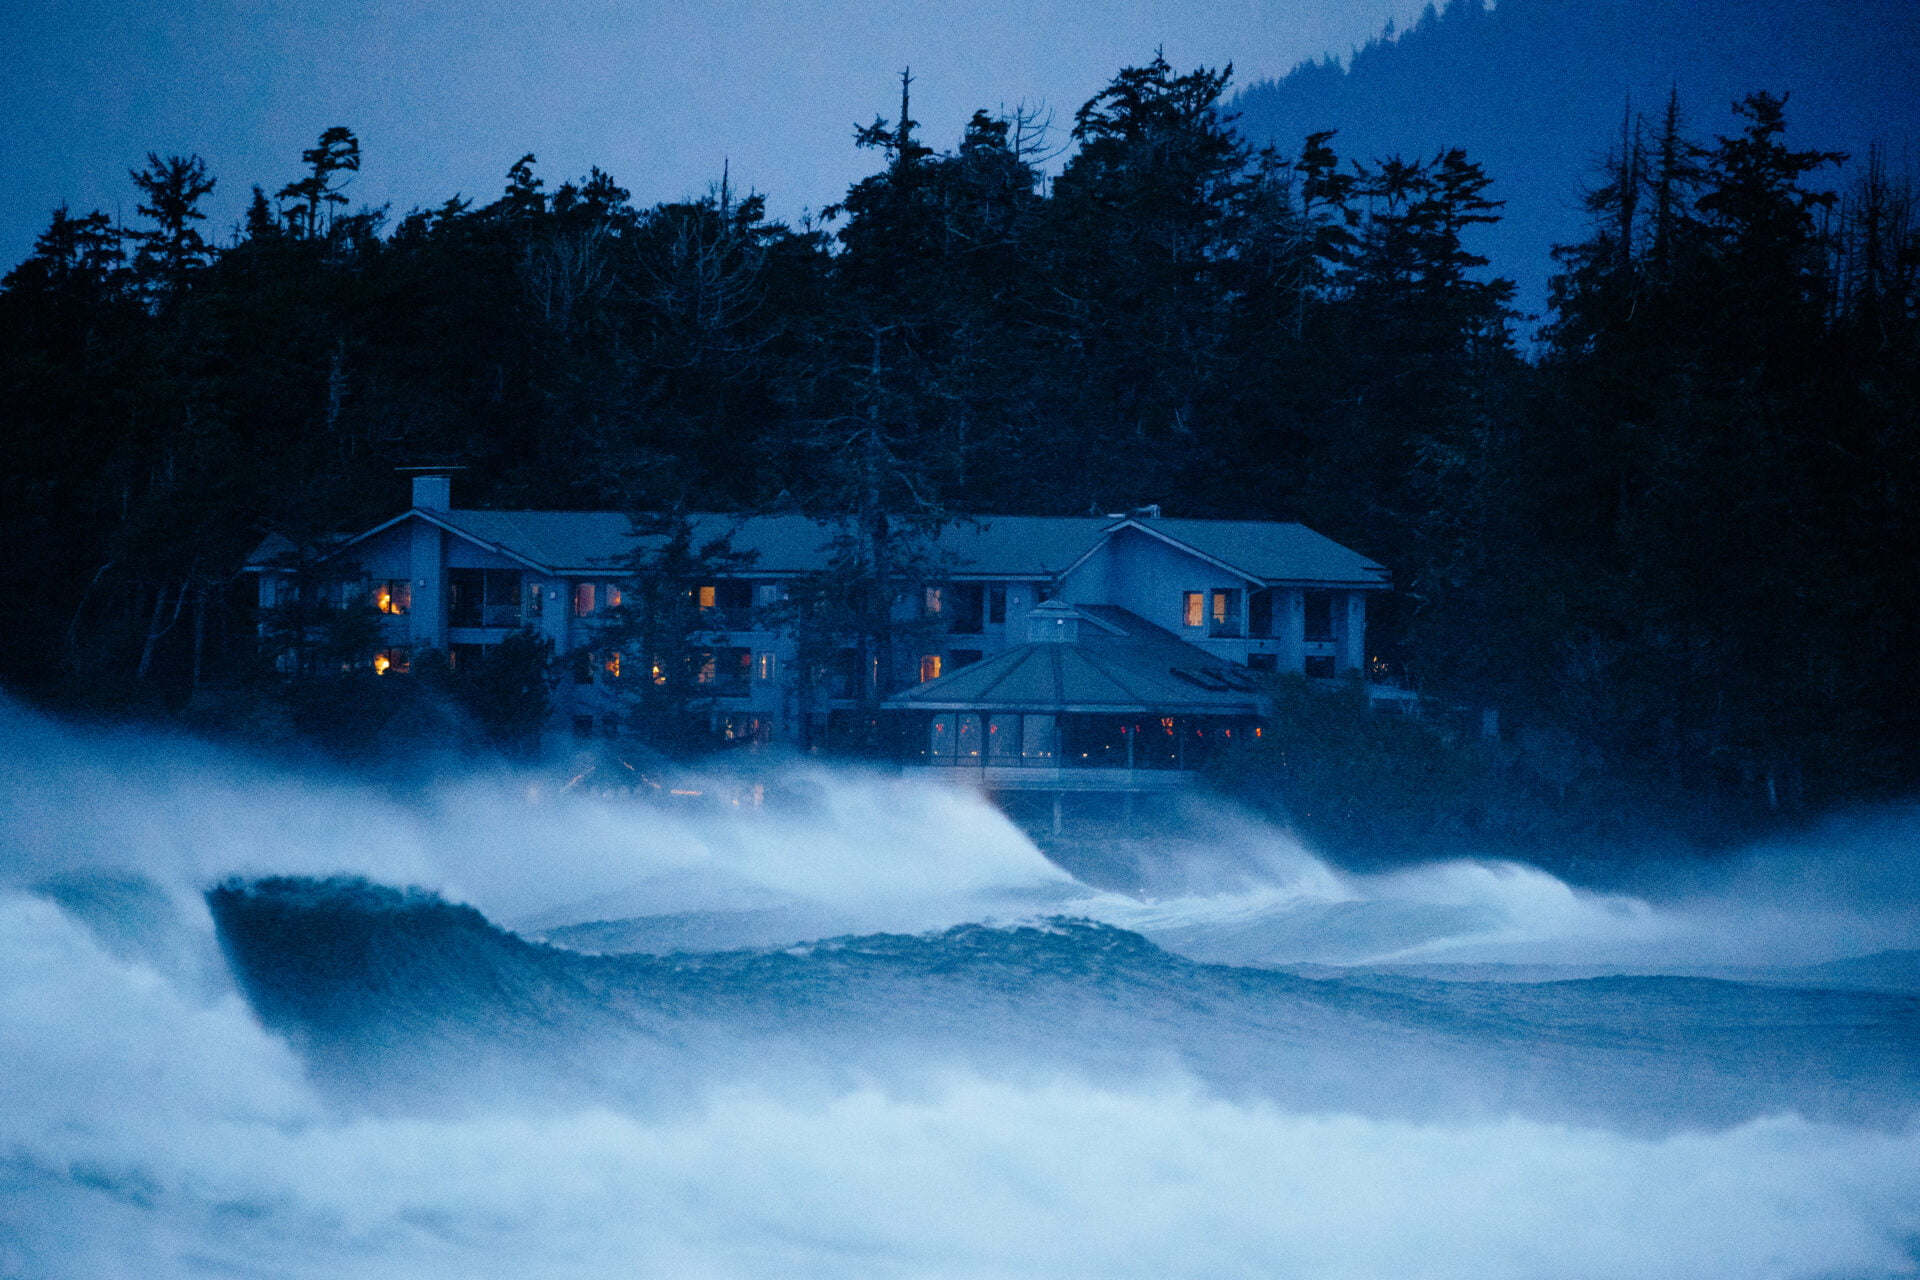 close up view of the wickanninish inn, the best storm watching hotel in tofino, surrounded by huge crashing winter storm waves at dusk.